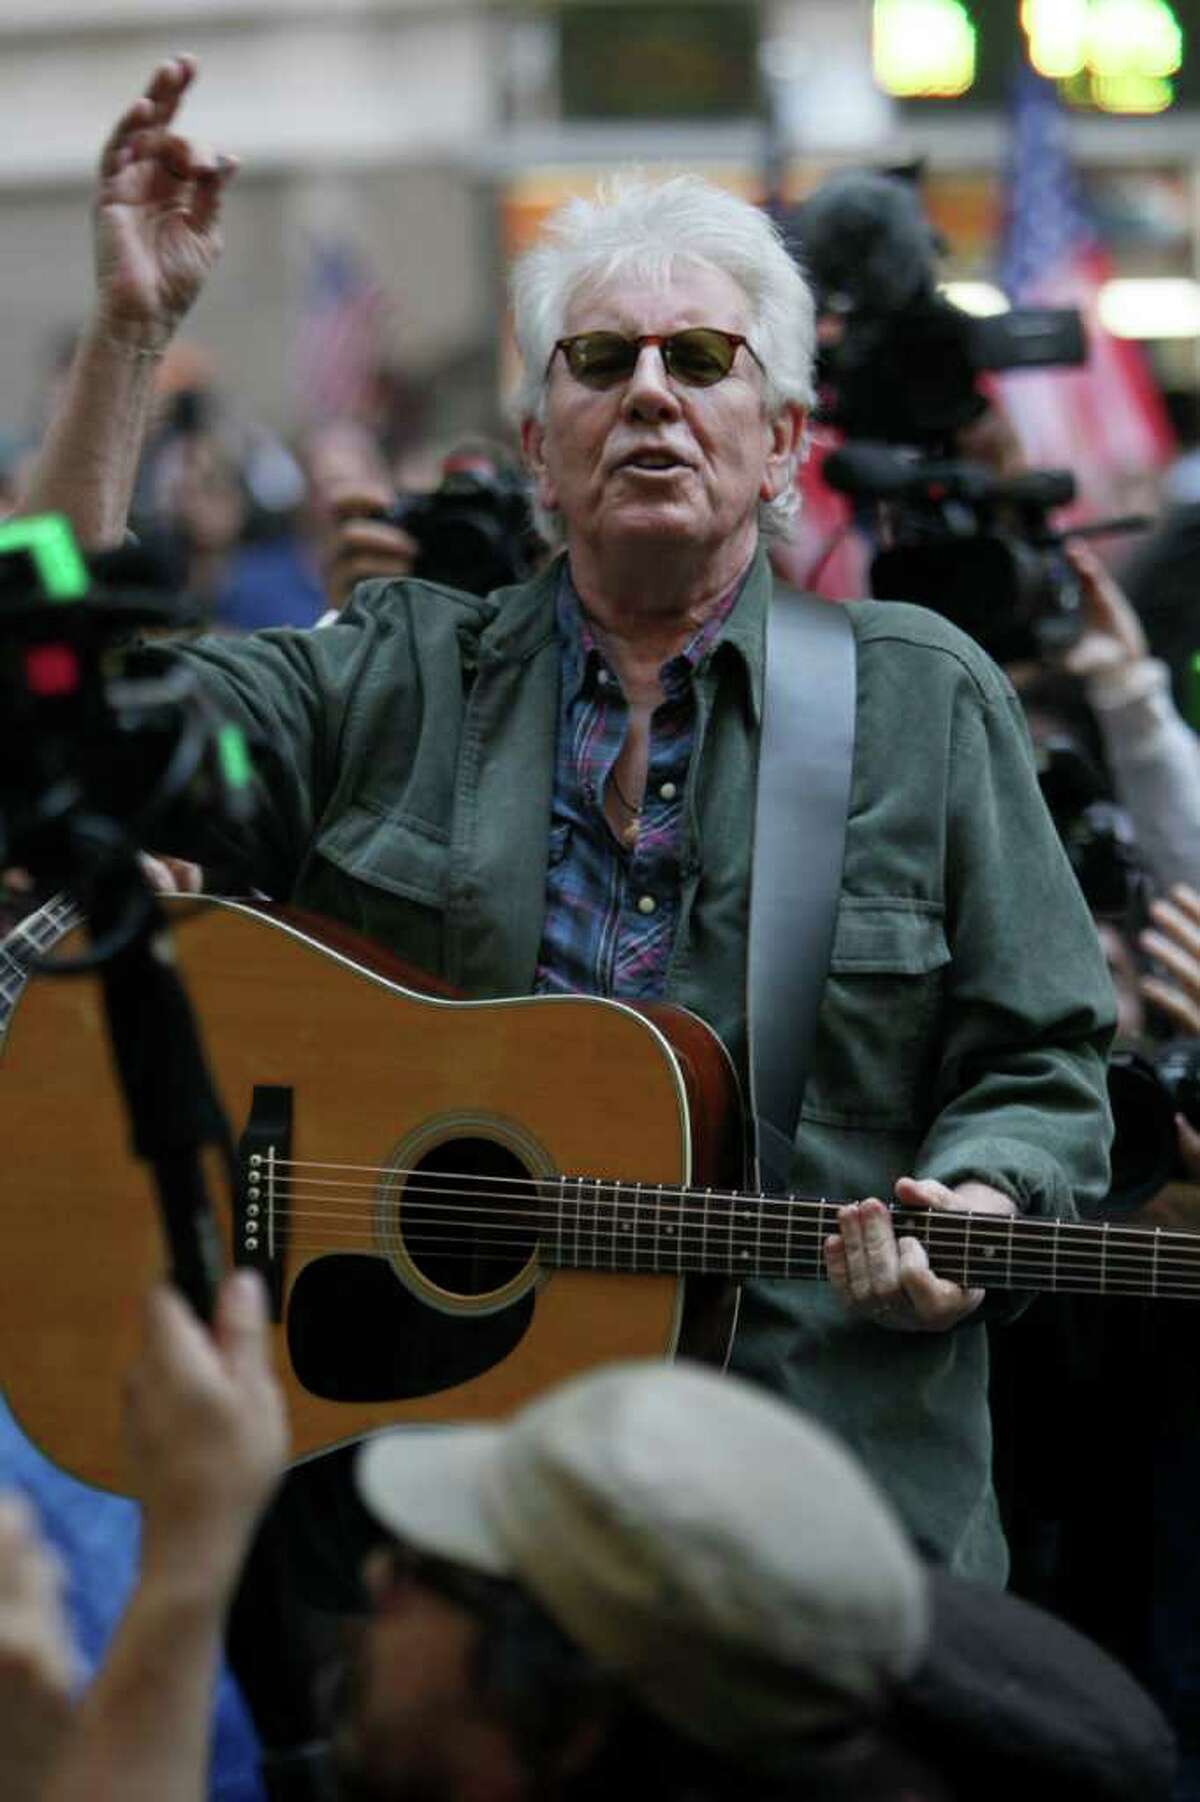 Graham Nash performs at the Occupy Wall Street encampment at Zuccotti Park, Tuesday, Nov. 8, 2011 in New York. (AP Photo/Mary Altaffer)